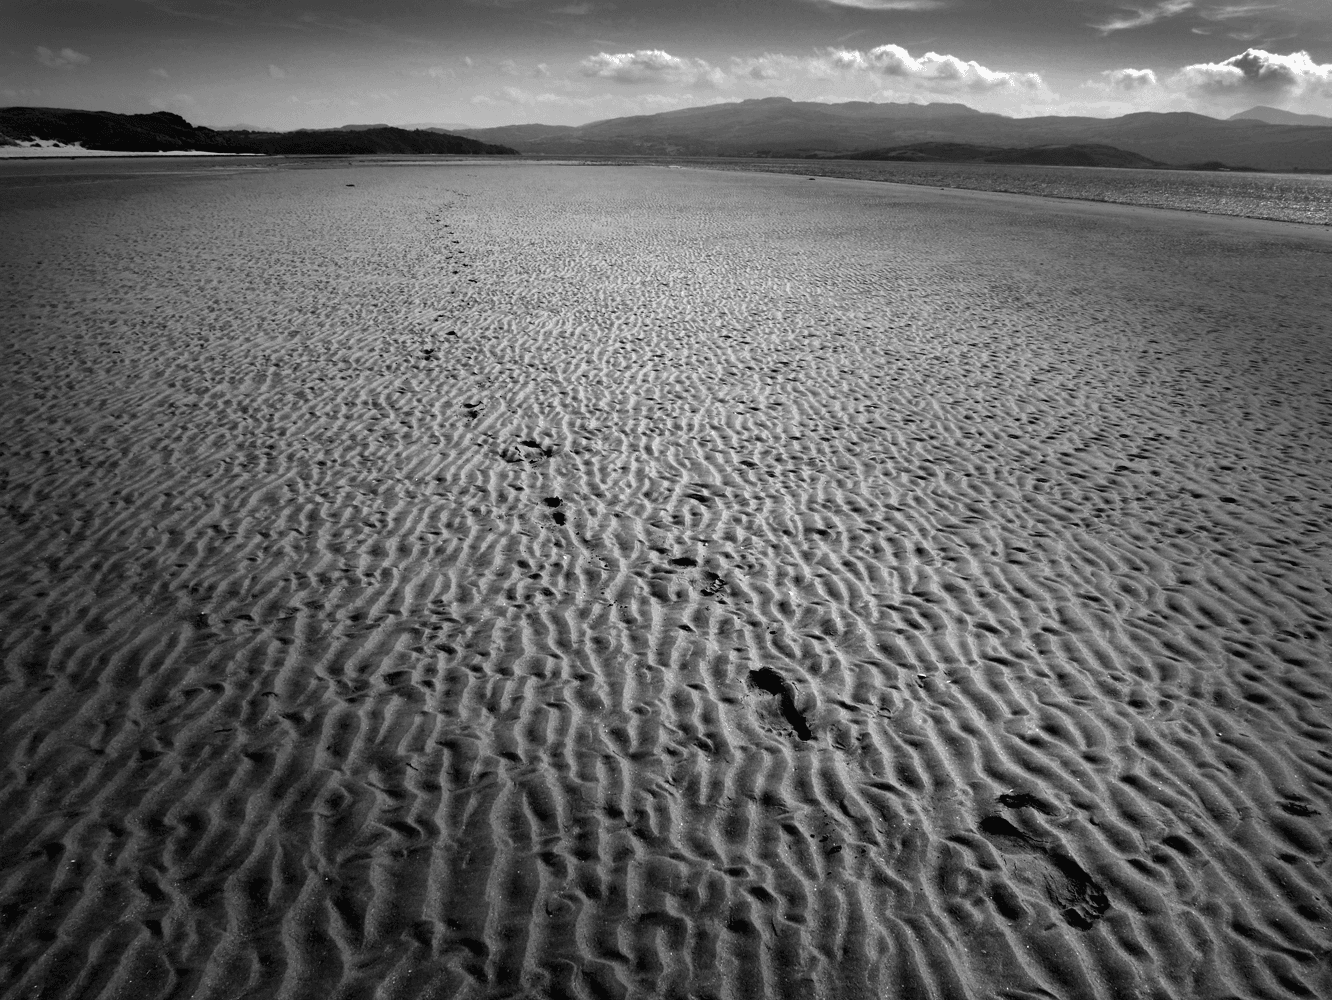 Footsteps in the Sand on a Deserted Beach